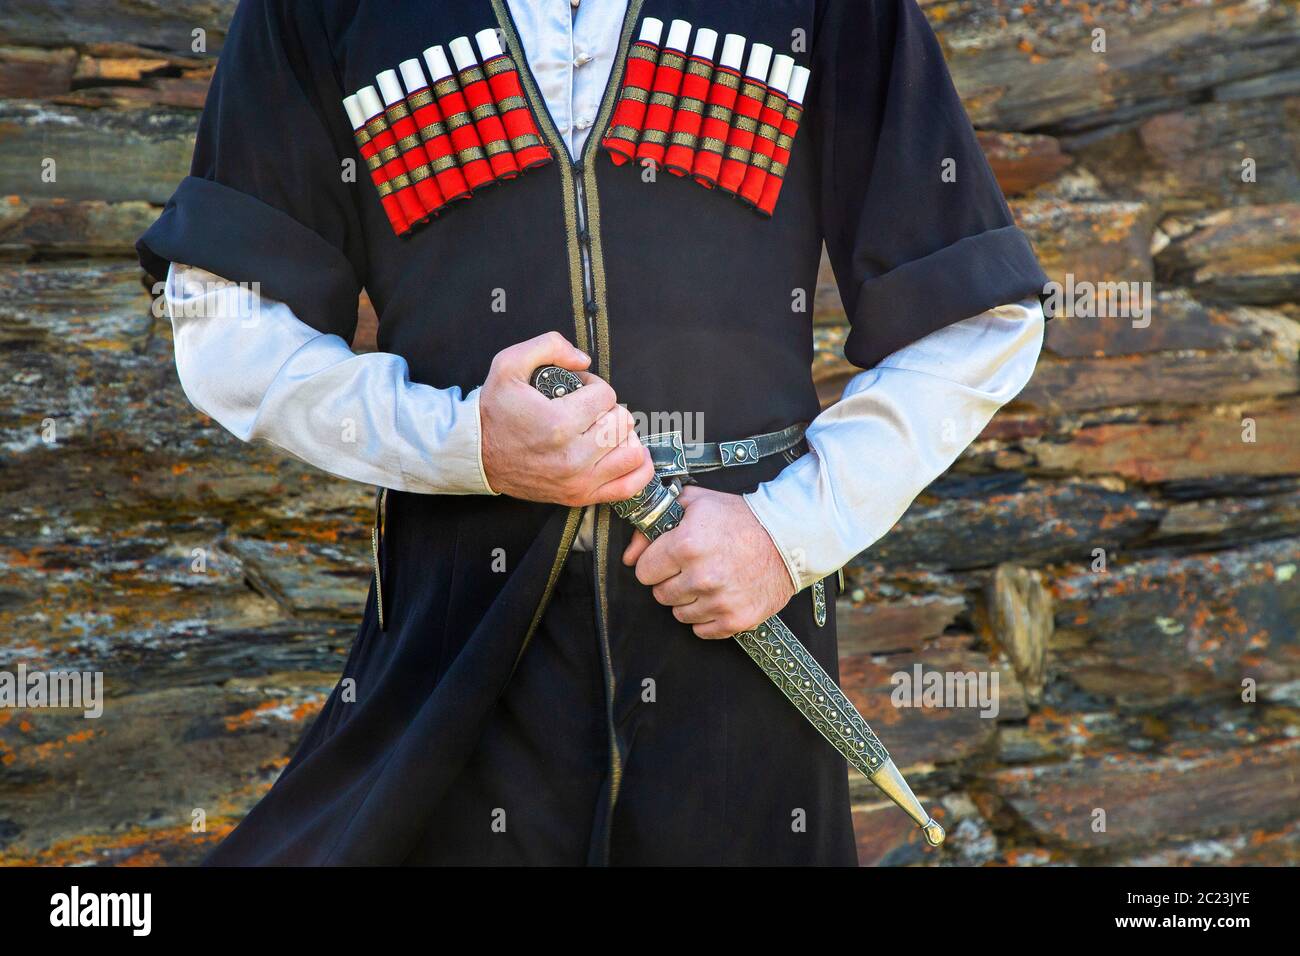 Georgian man in traditional clothes holding the dagger, Caucasus Mountains, Georgia Stock Photo